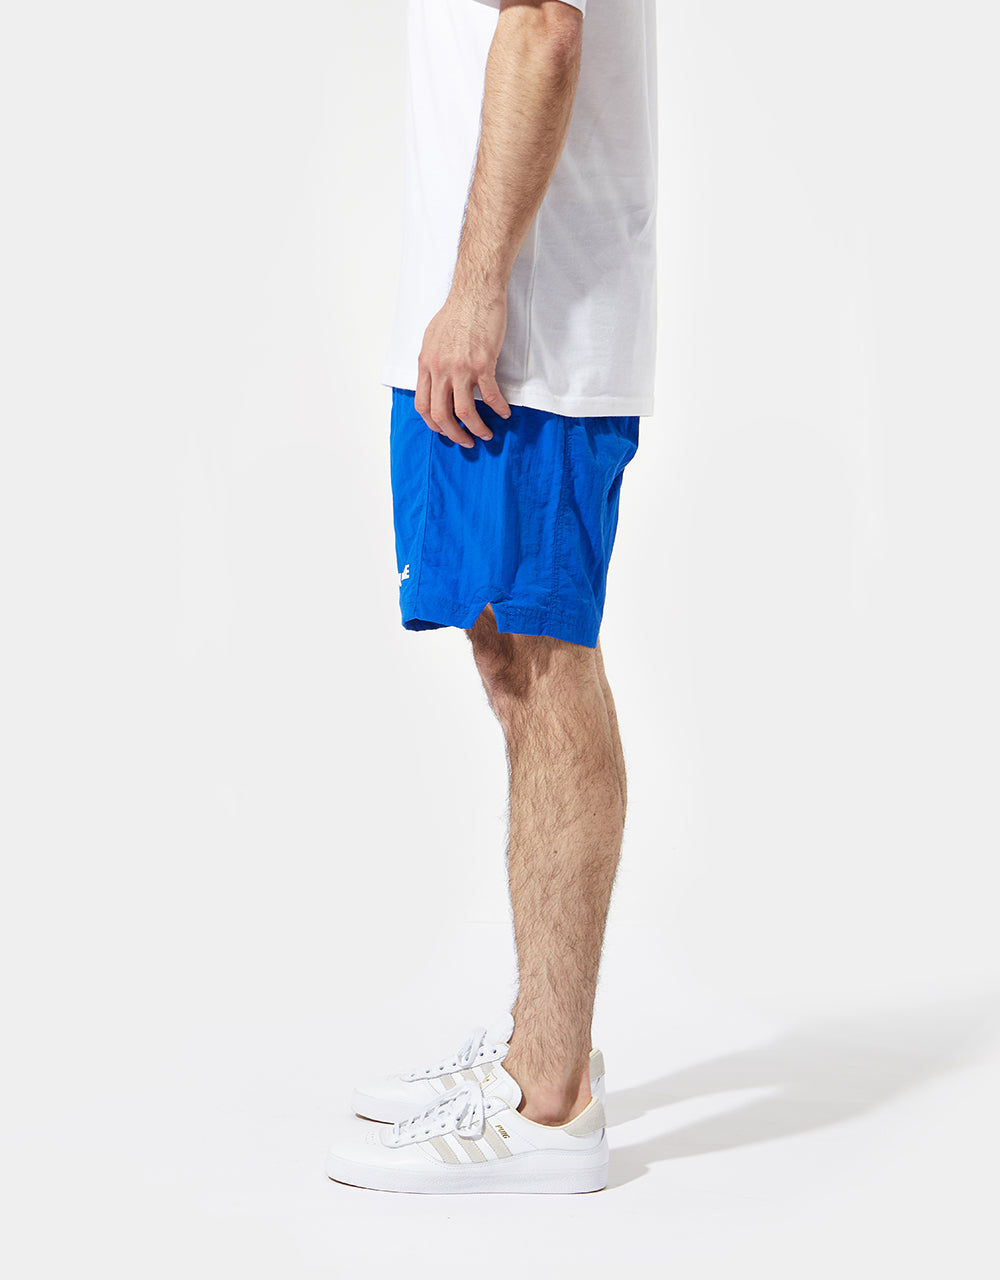 Route One Jammin Shorts - Royal Blue